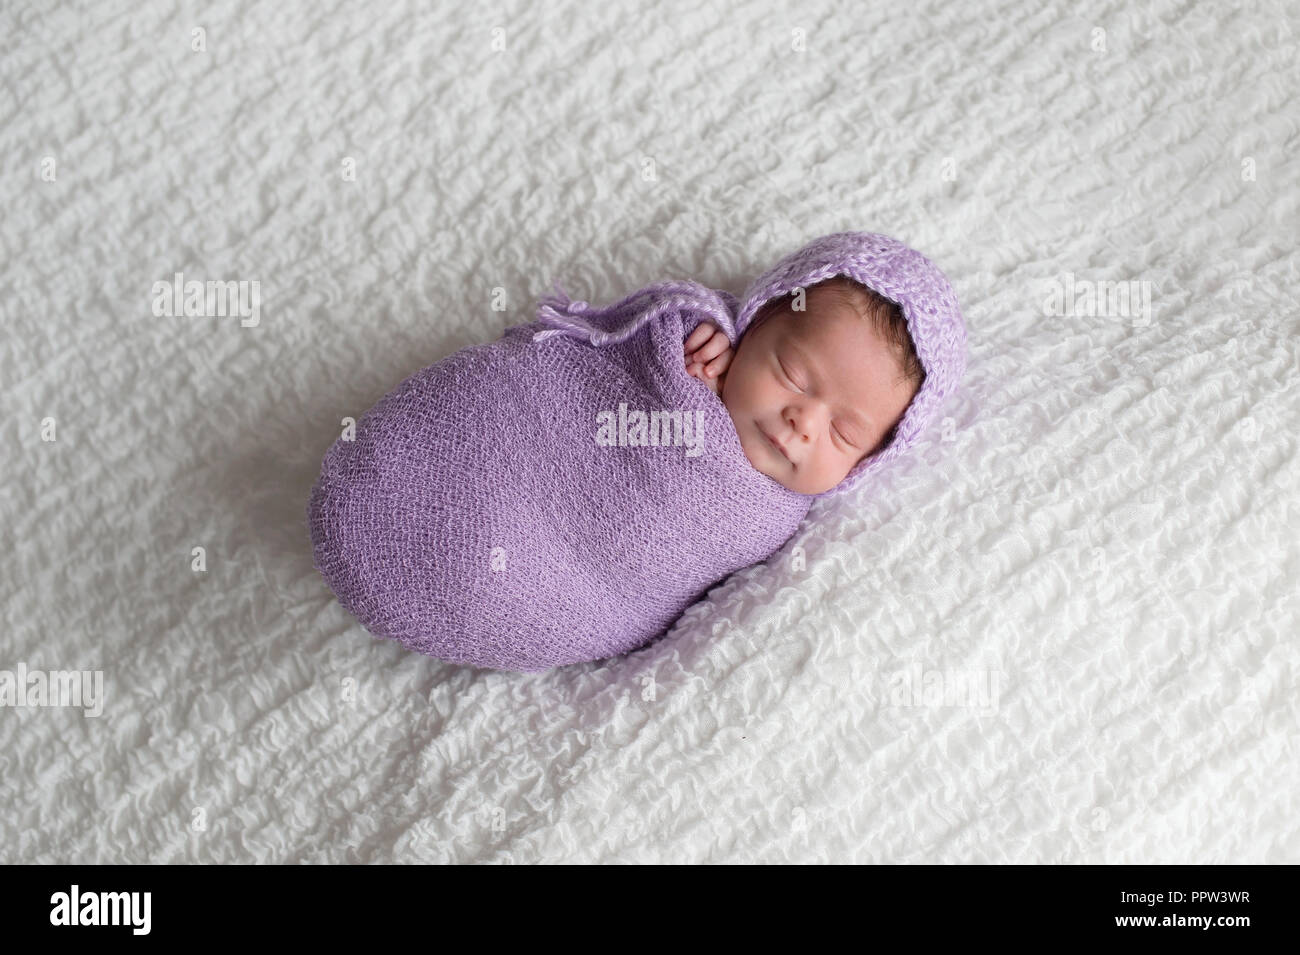 A smiling, two week old newborn baby girl swaddled in a lavender wrap and wearing a crocheted bonnet. Shot in the studio on a white blanket. Stock Photo